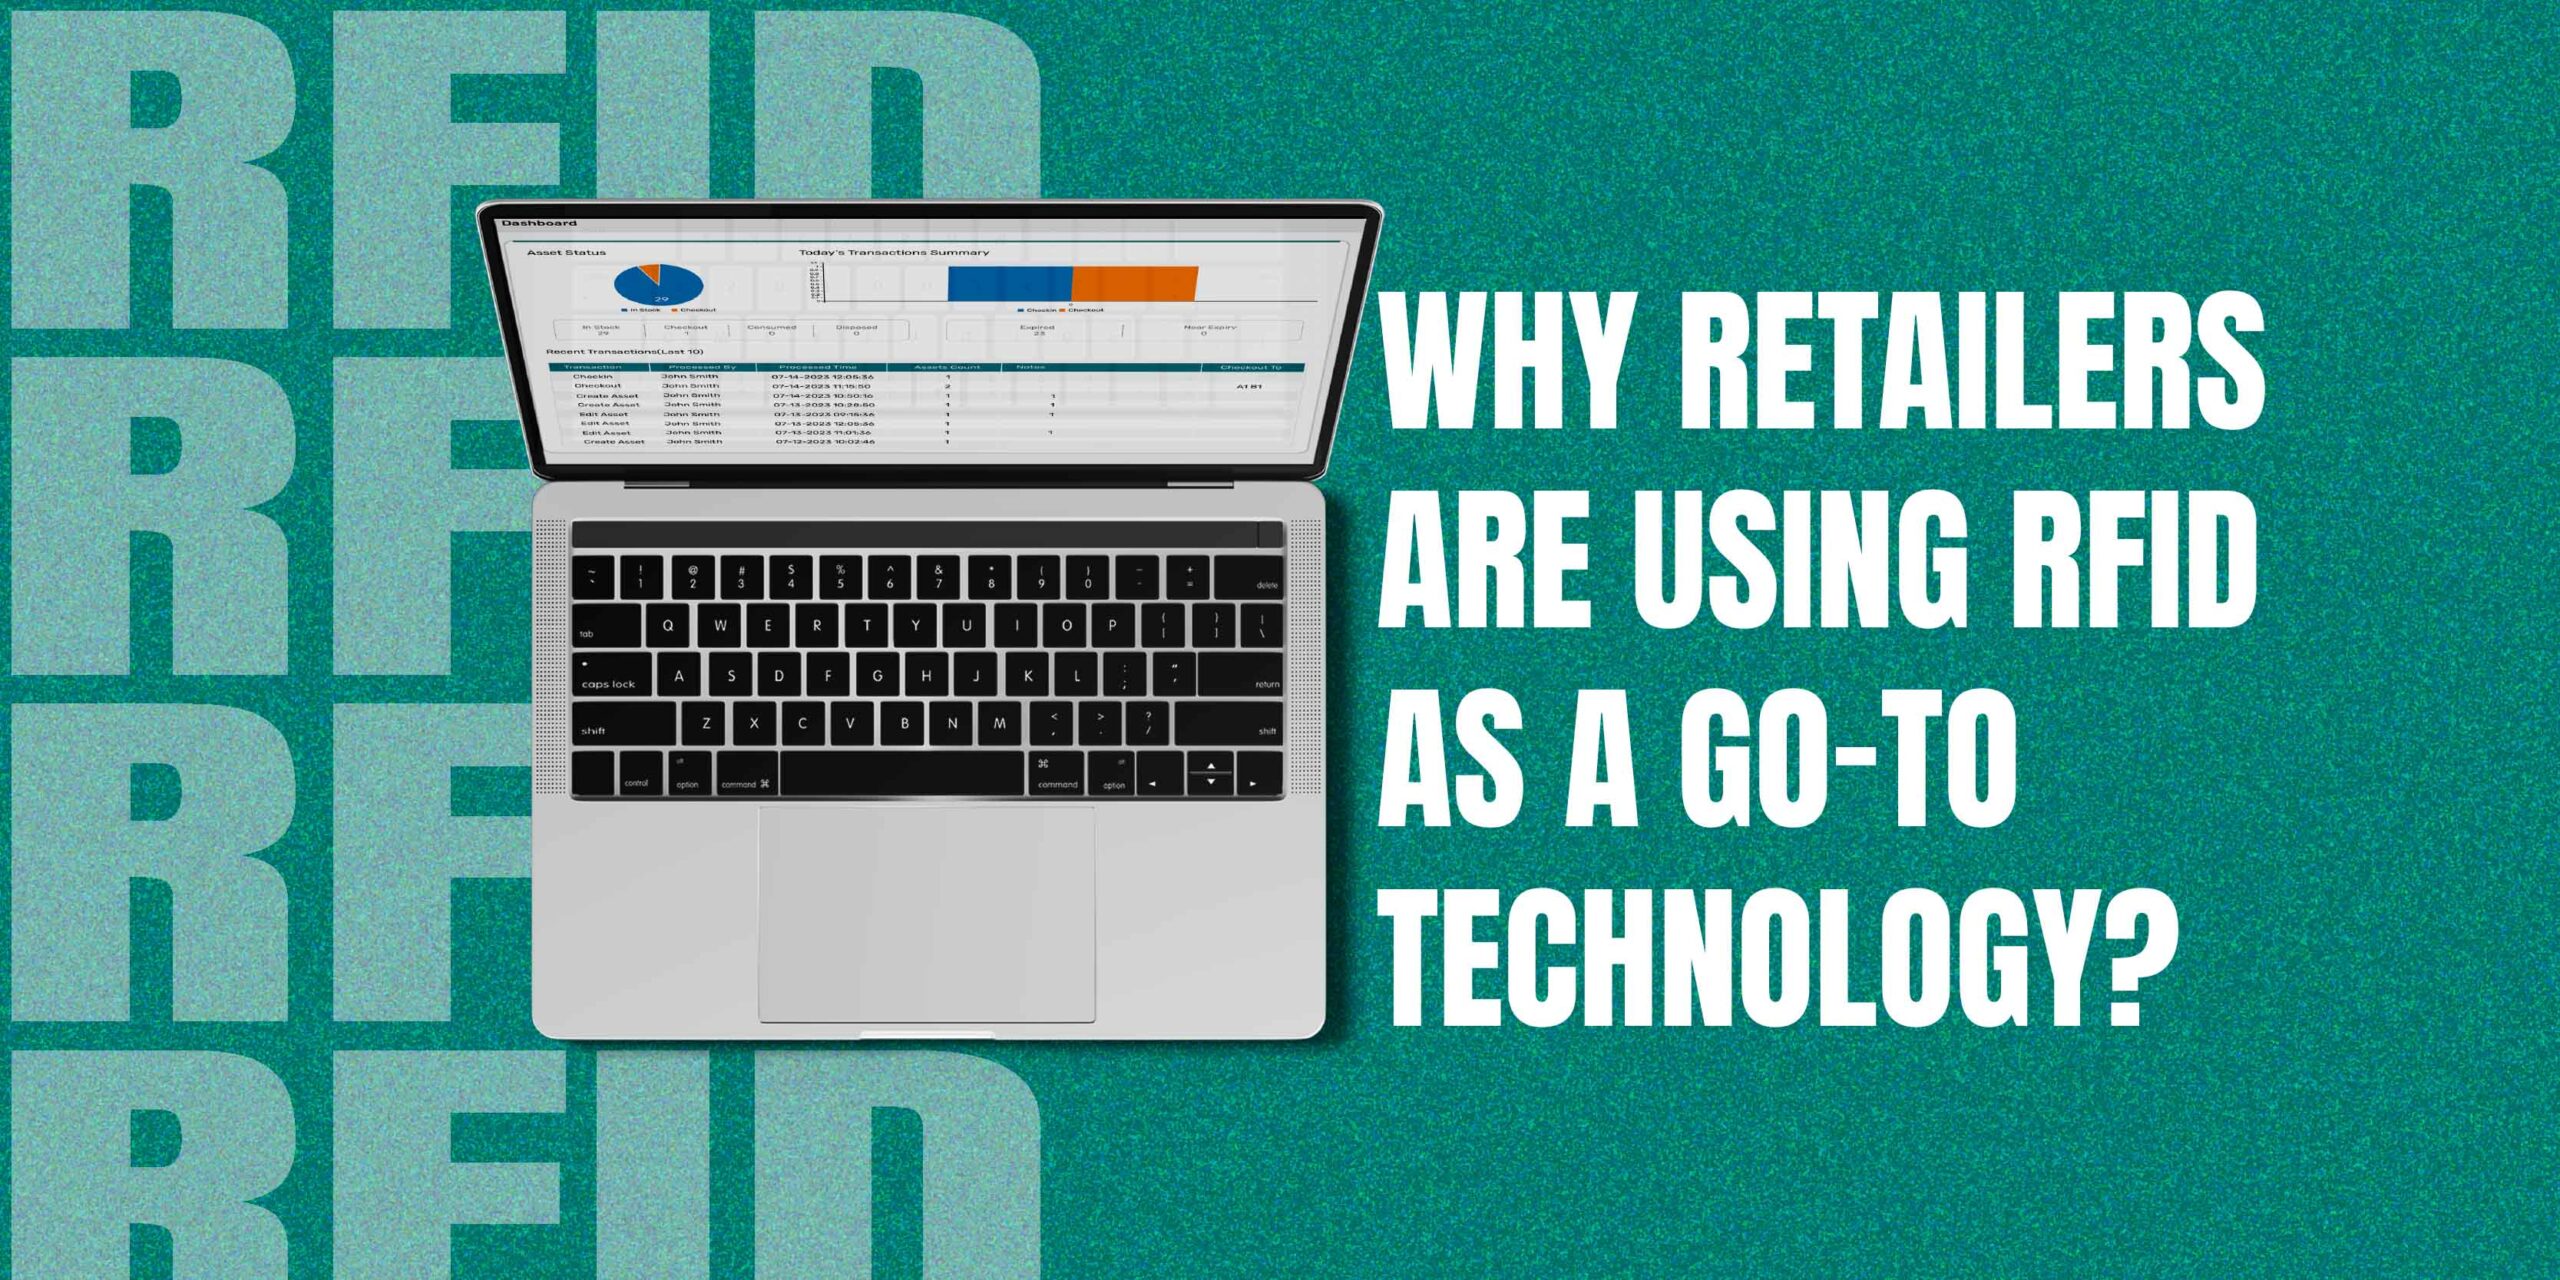 RFID Technology in Retail - Why Retailers Are Using RFID